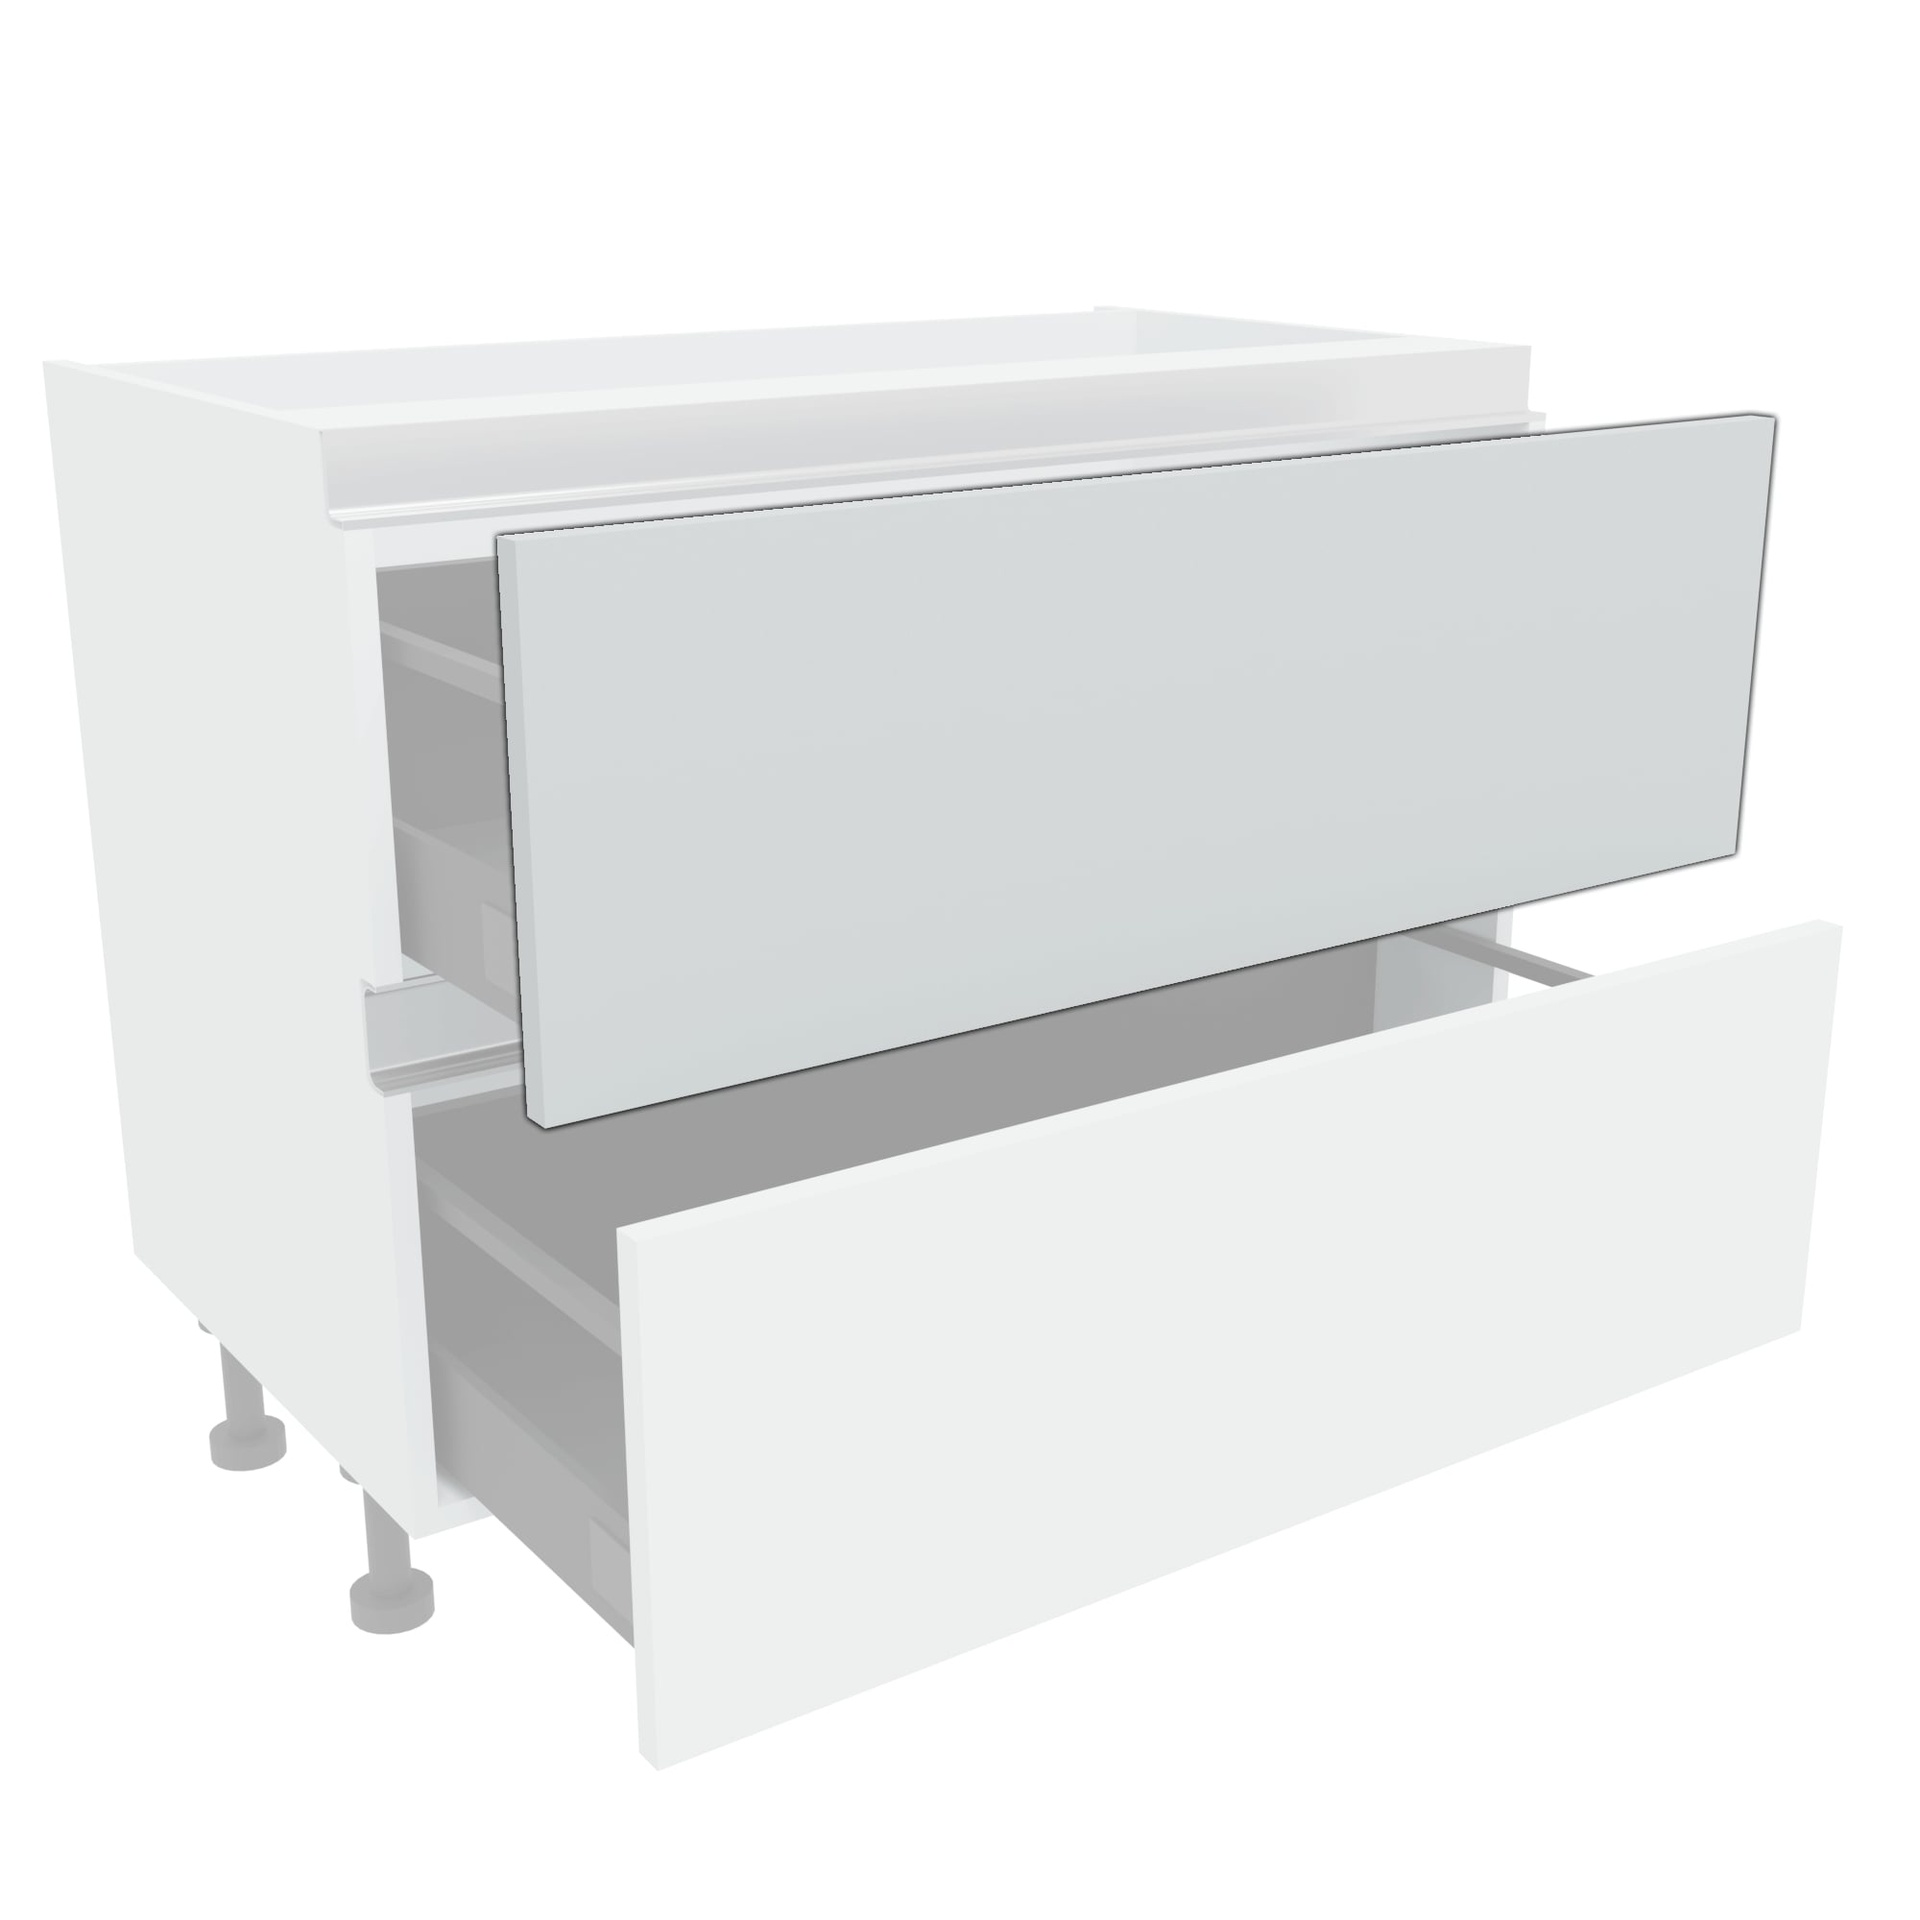 325 x 996mm Drawer Front